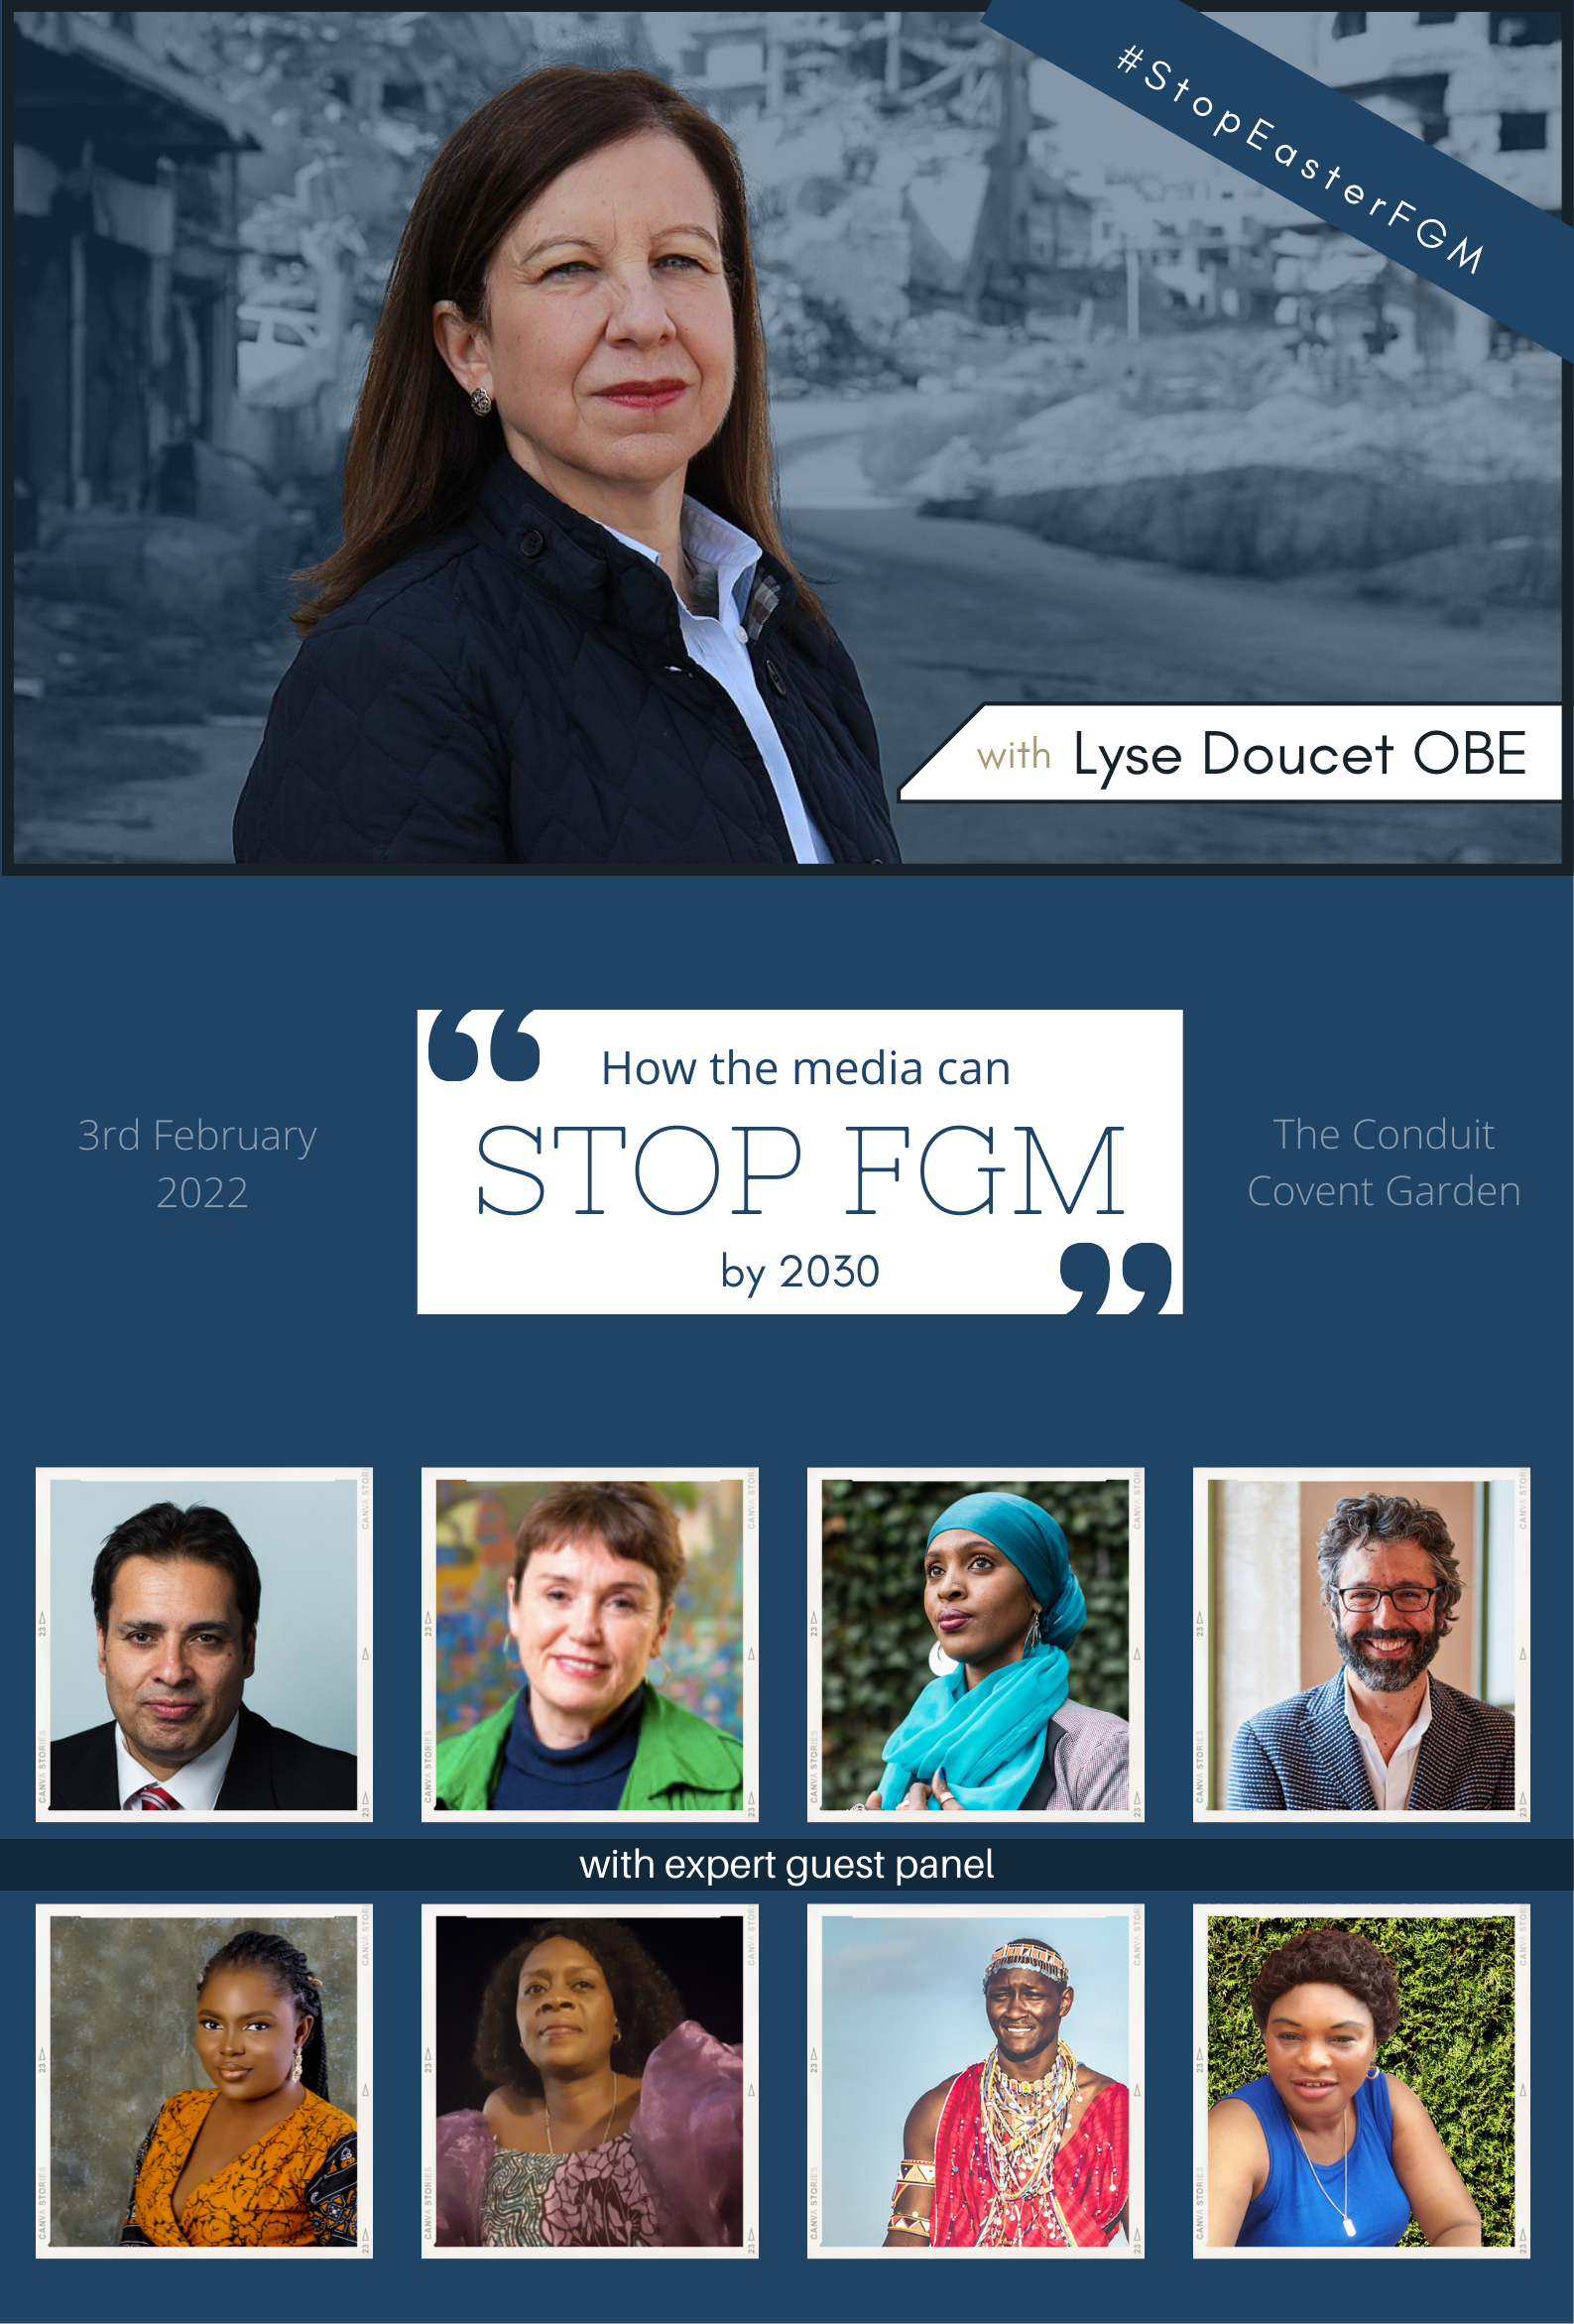 Lyse Doucet + experts discuss: How the media can end FGM by 2030